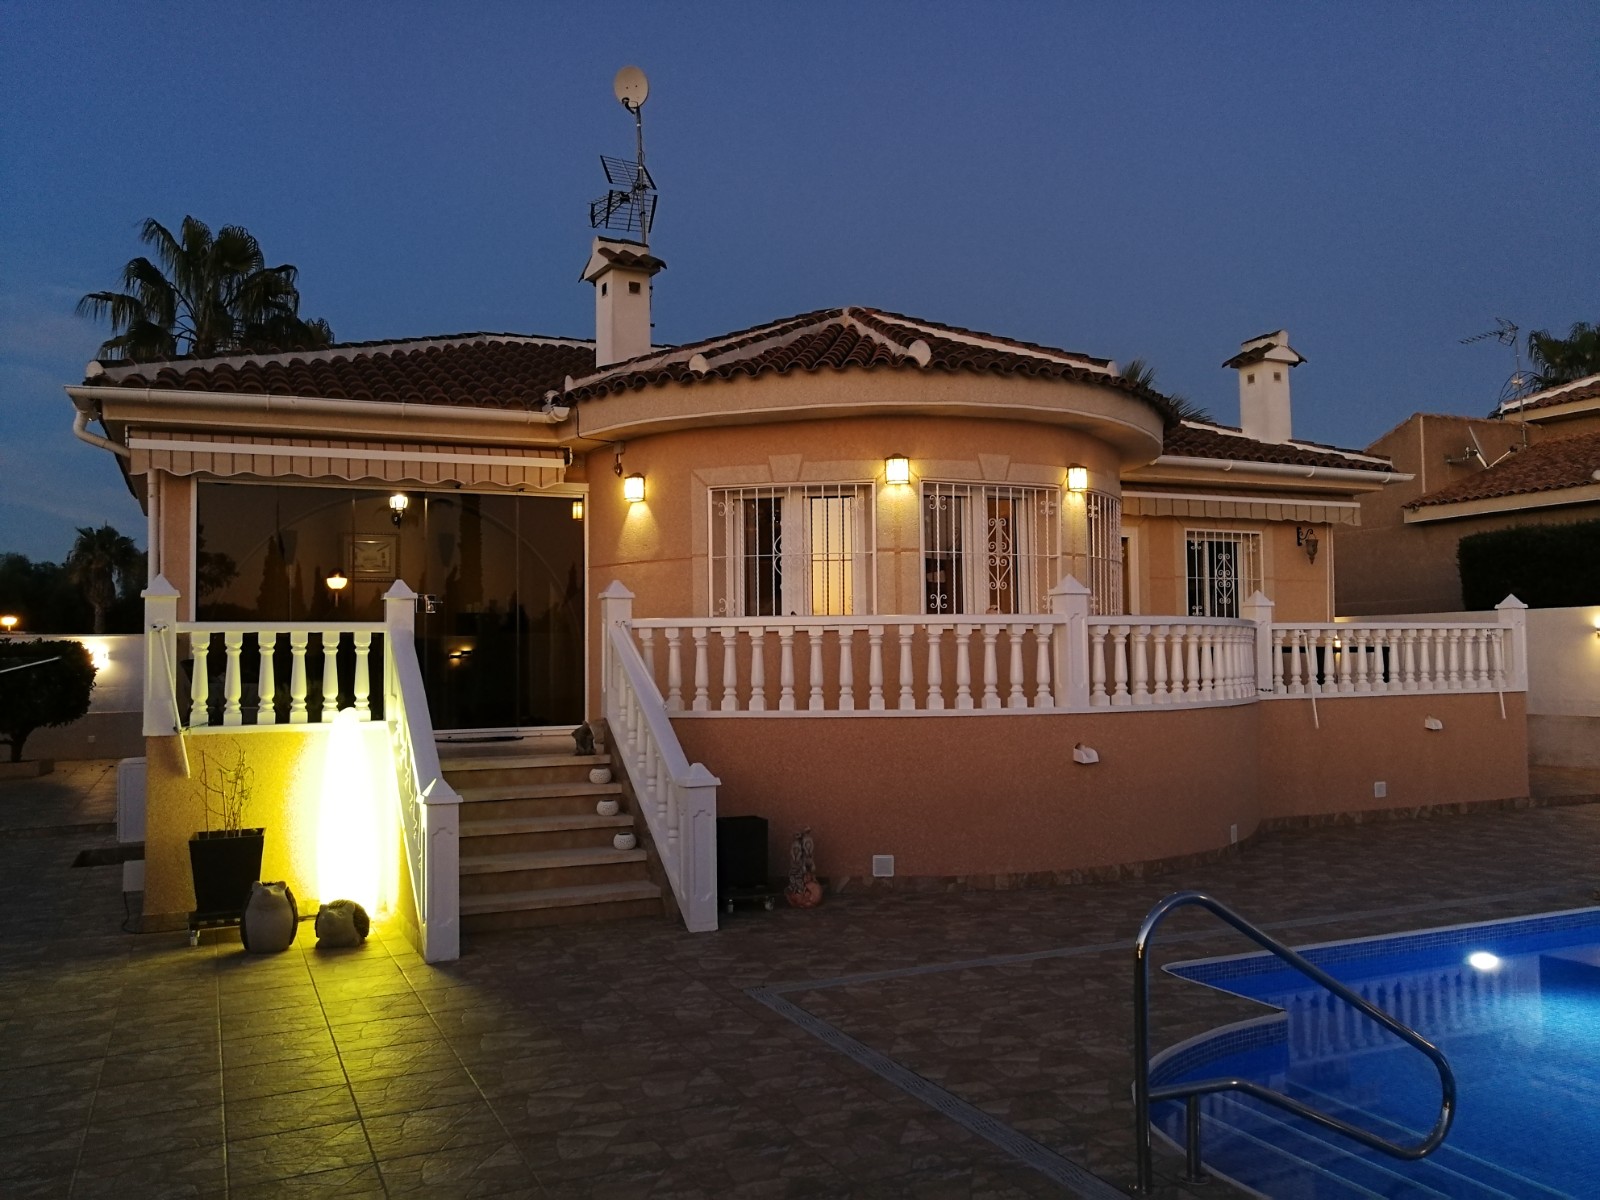 South Facing 3 Bed, 2 Bath Detached Villa, with Heated Salt Water Pool in Benijofar